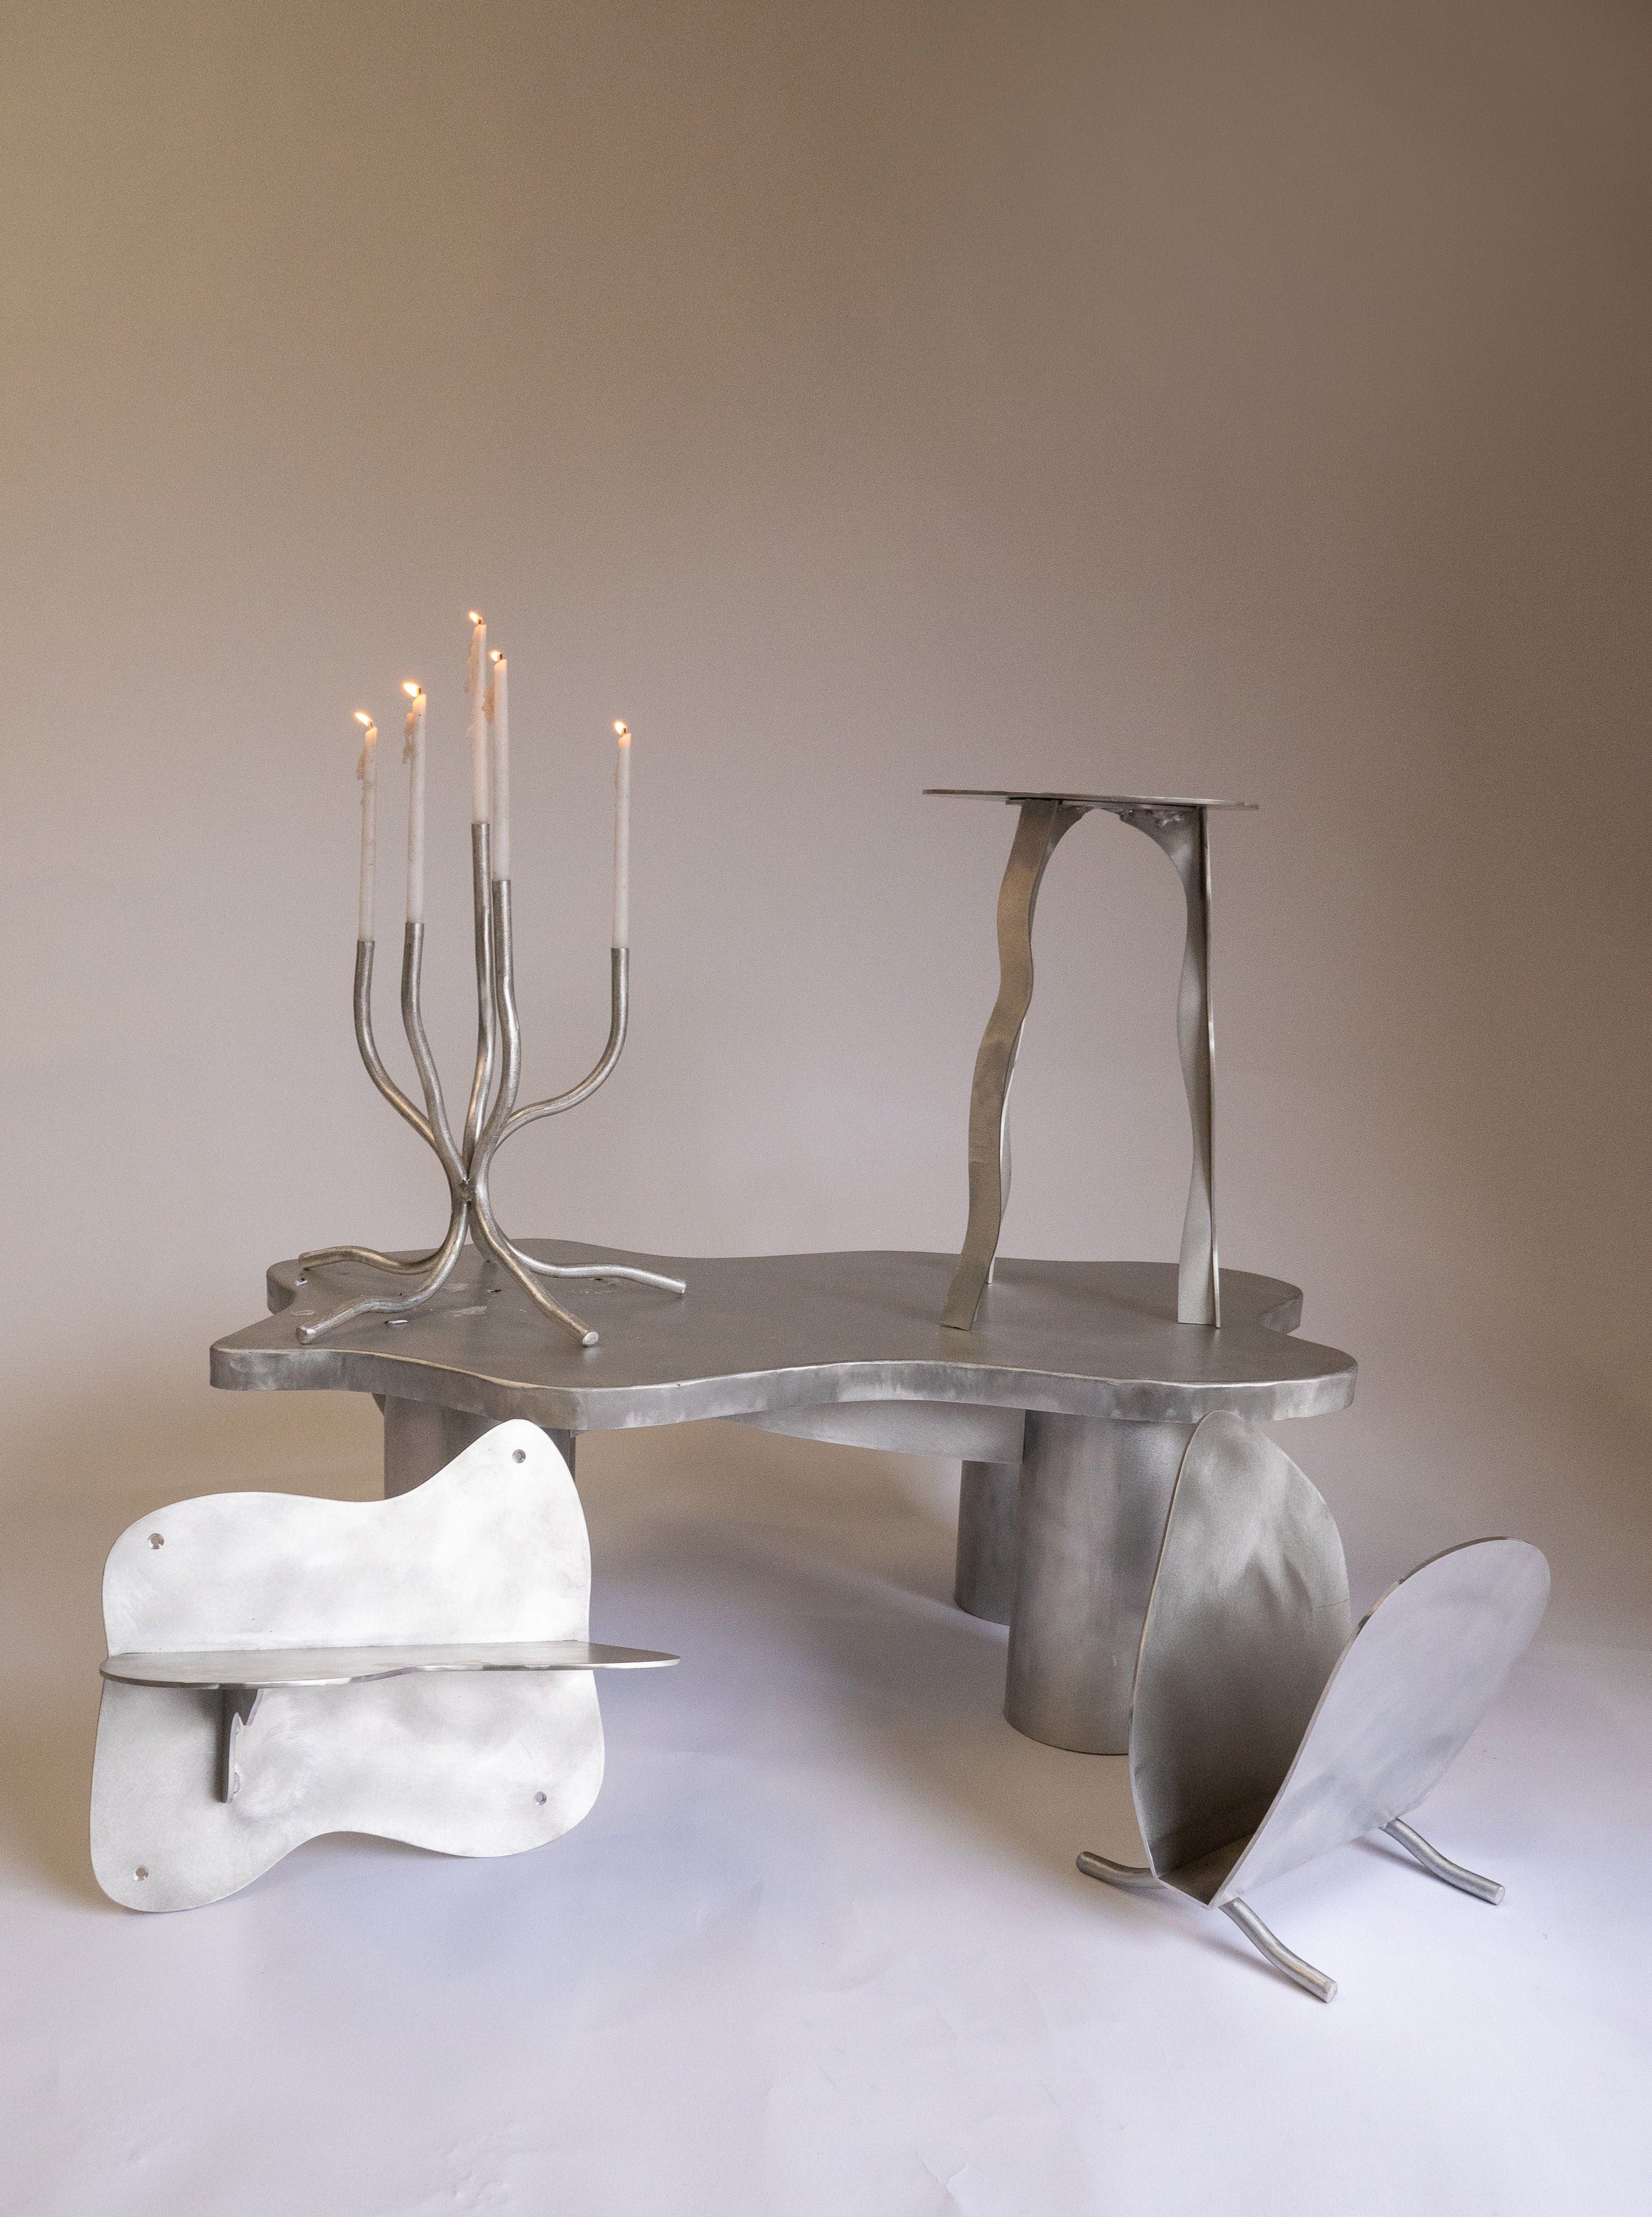 A surreal, metallic furniture set containing a table, chair, and Six Dots Design Small Candelabra with curved and irregular shapes, set against a neutral backdrop.